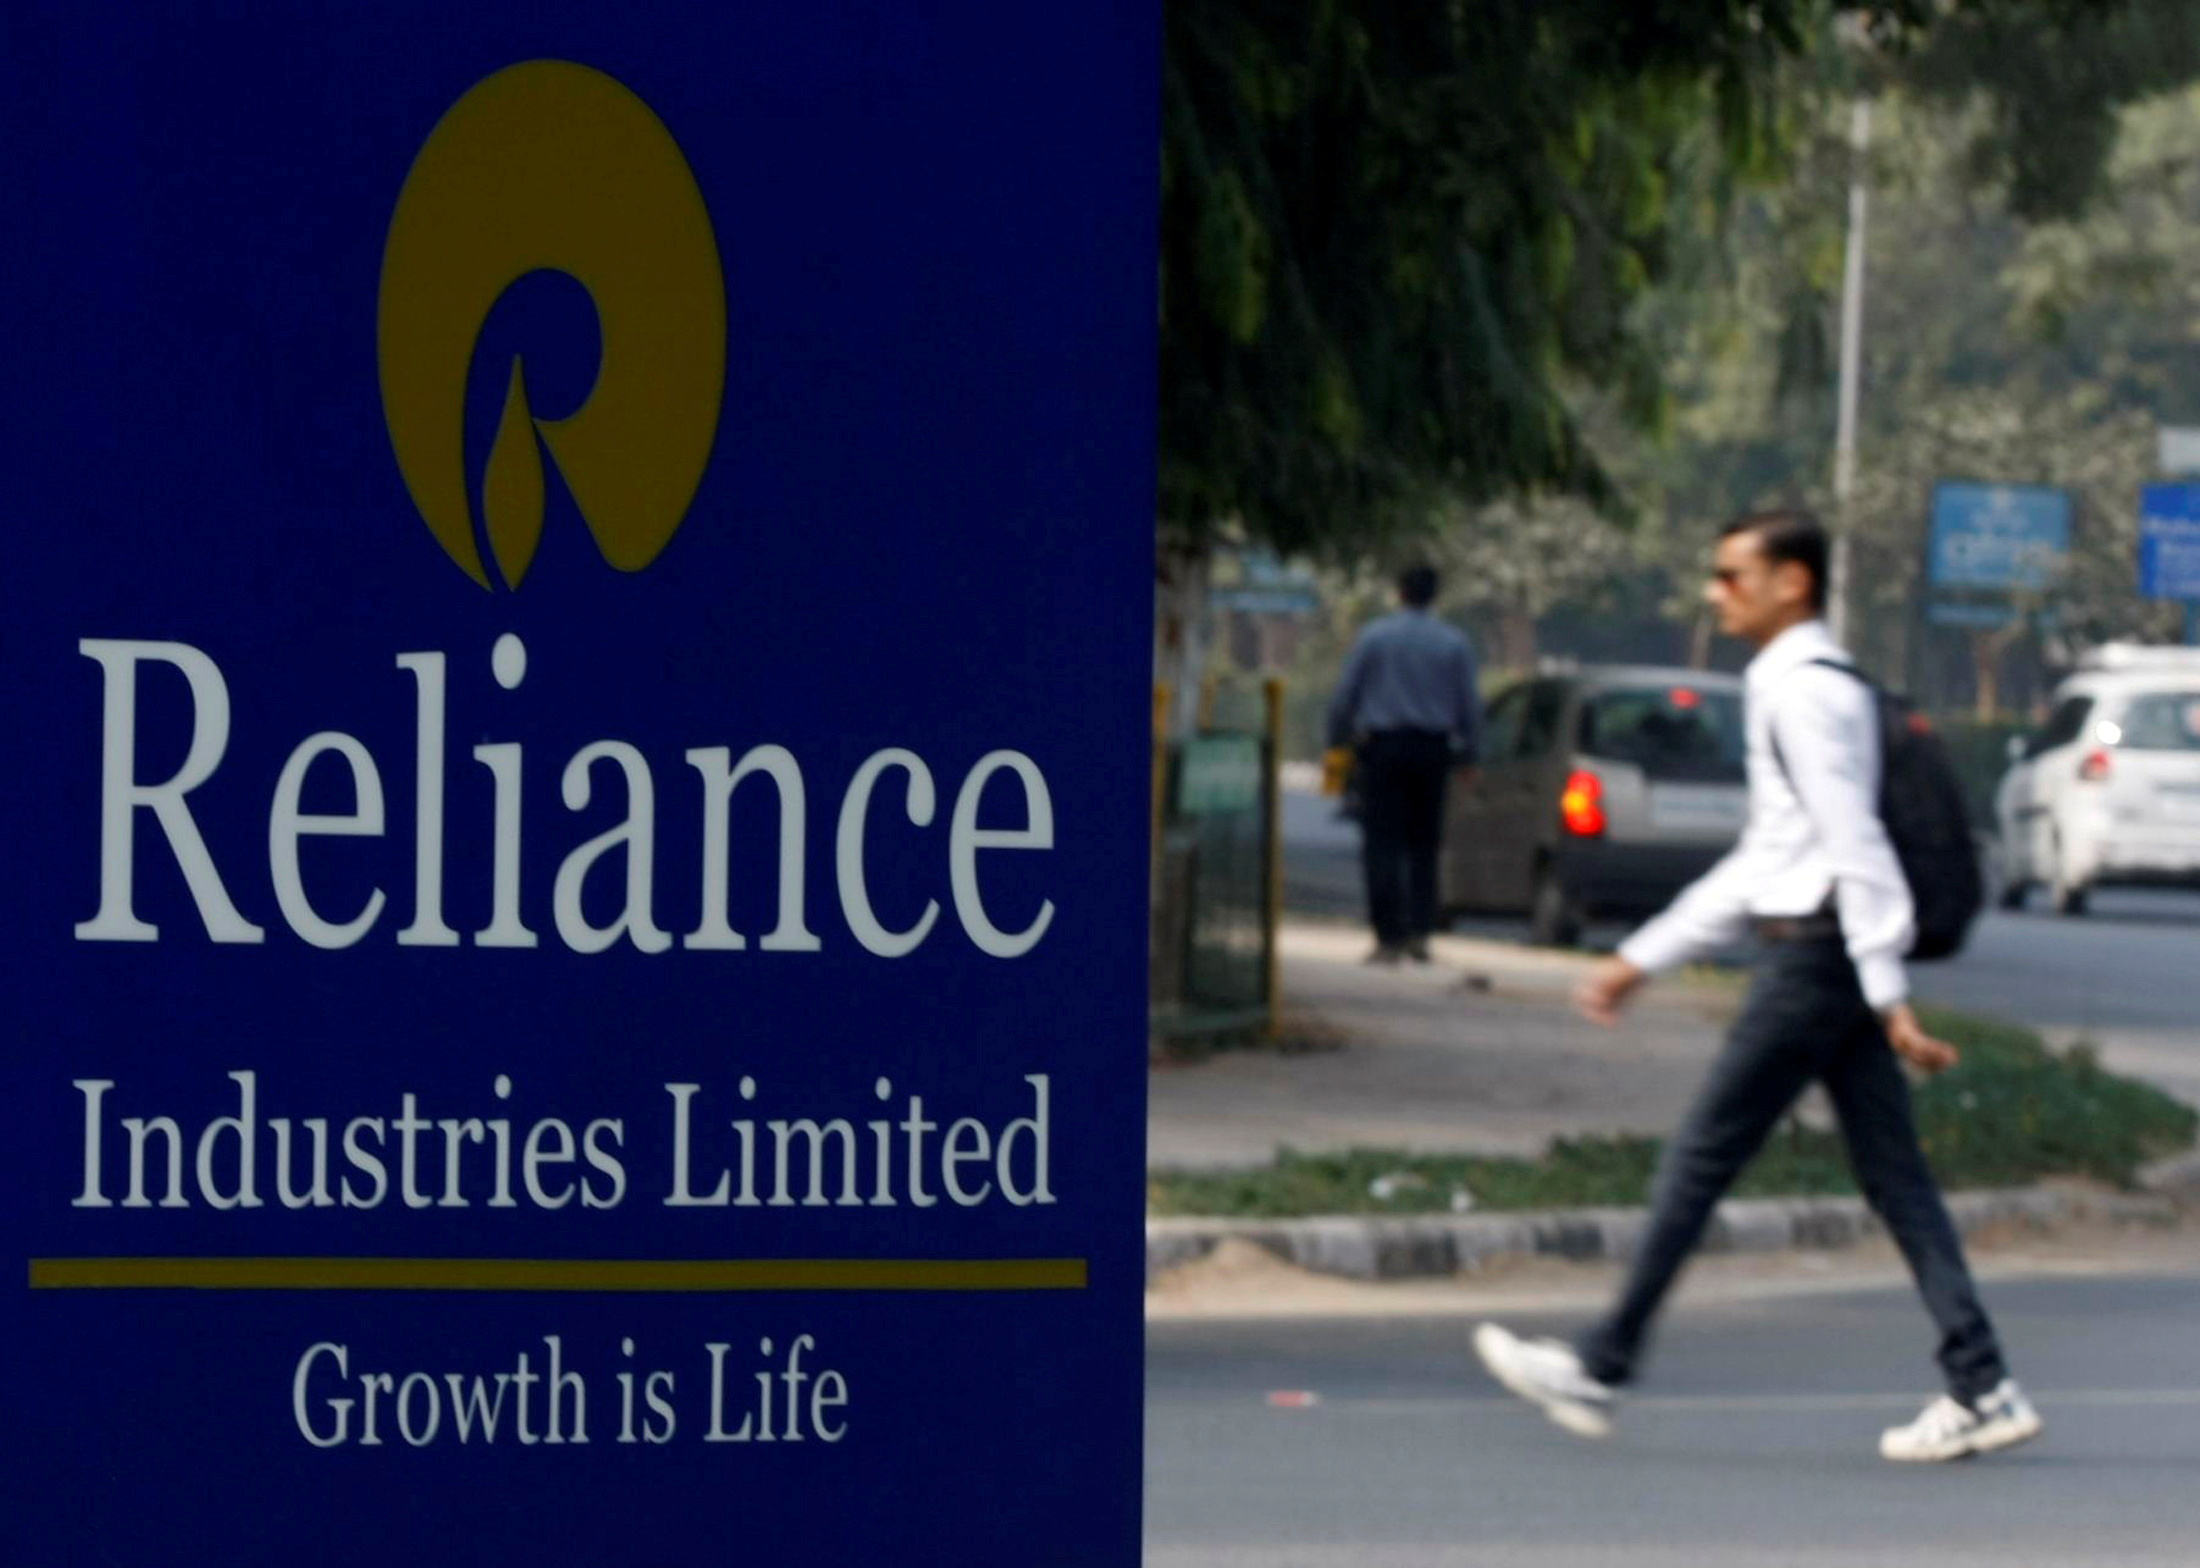 A man walks past a Reliance Industries Limited sign board installed on a road divider in the western Indian city of Gandhinagar January 17, 2014. REUTERS/Amit Dave